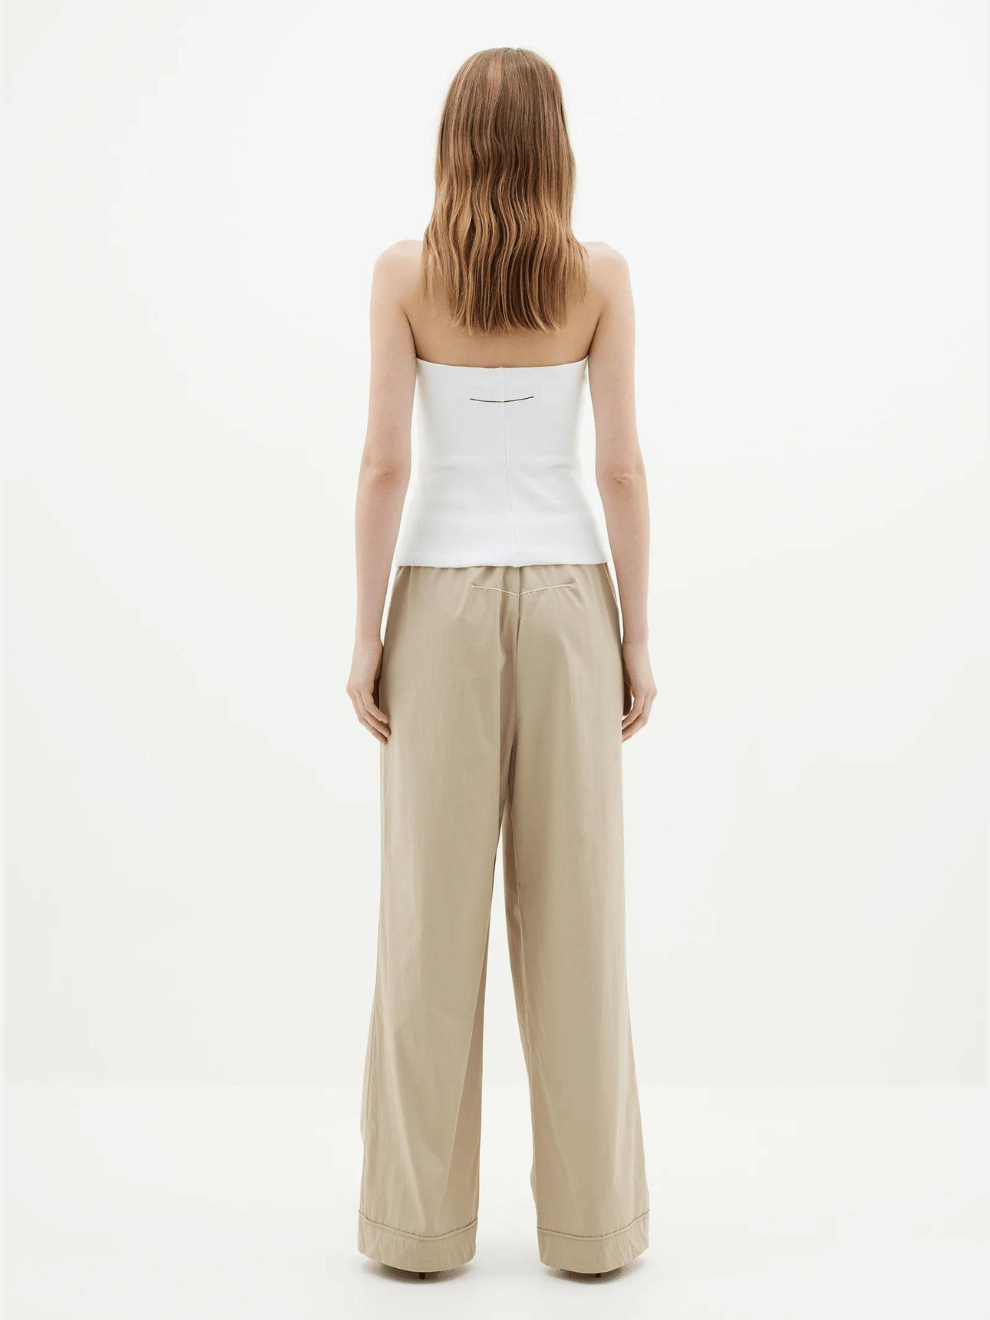 Cotton Summer Pant in Tan